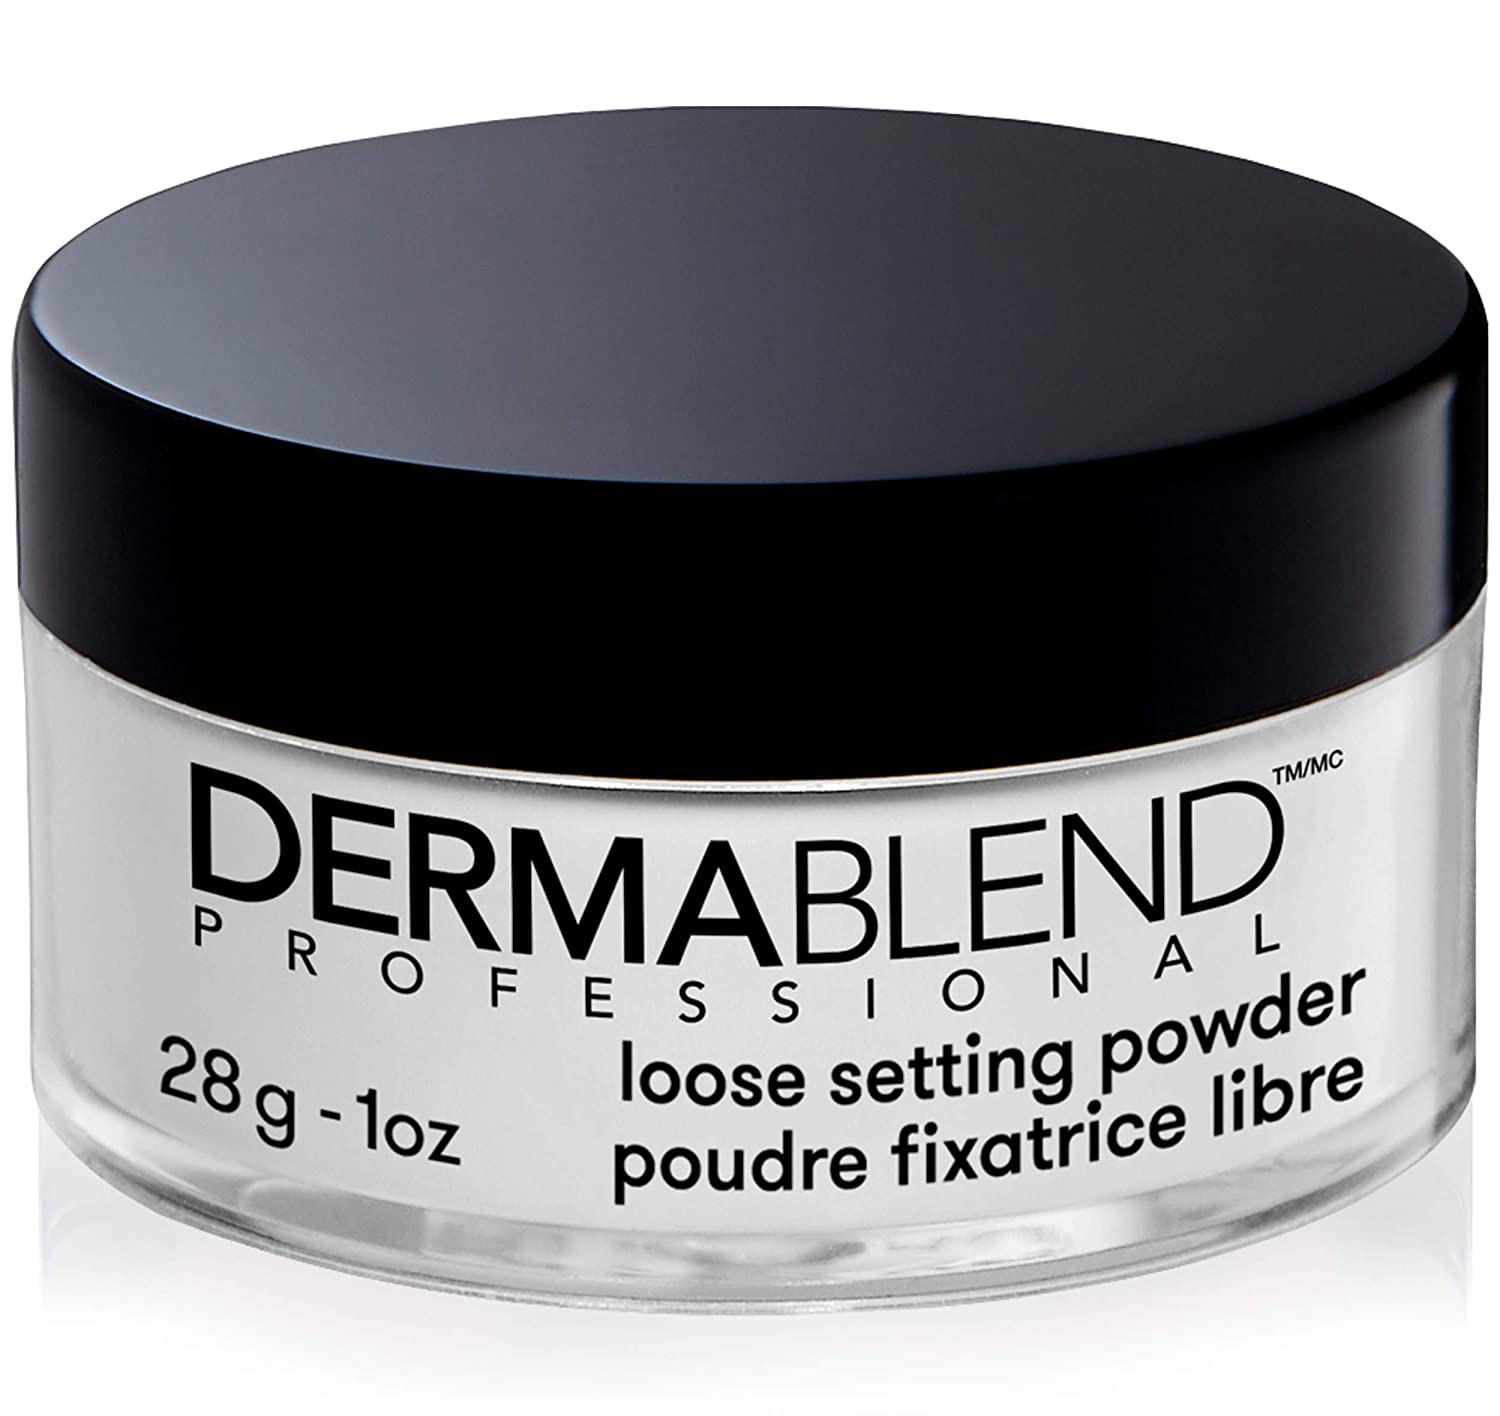 Dermablend Fragrance-Free & Oil-Free Face Powder